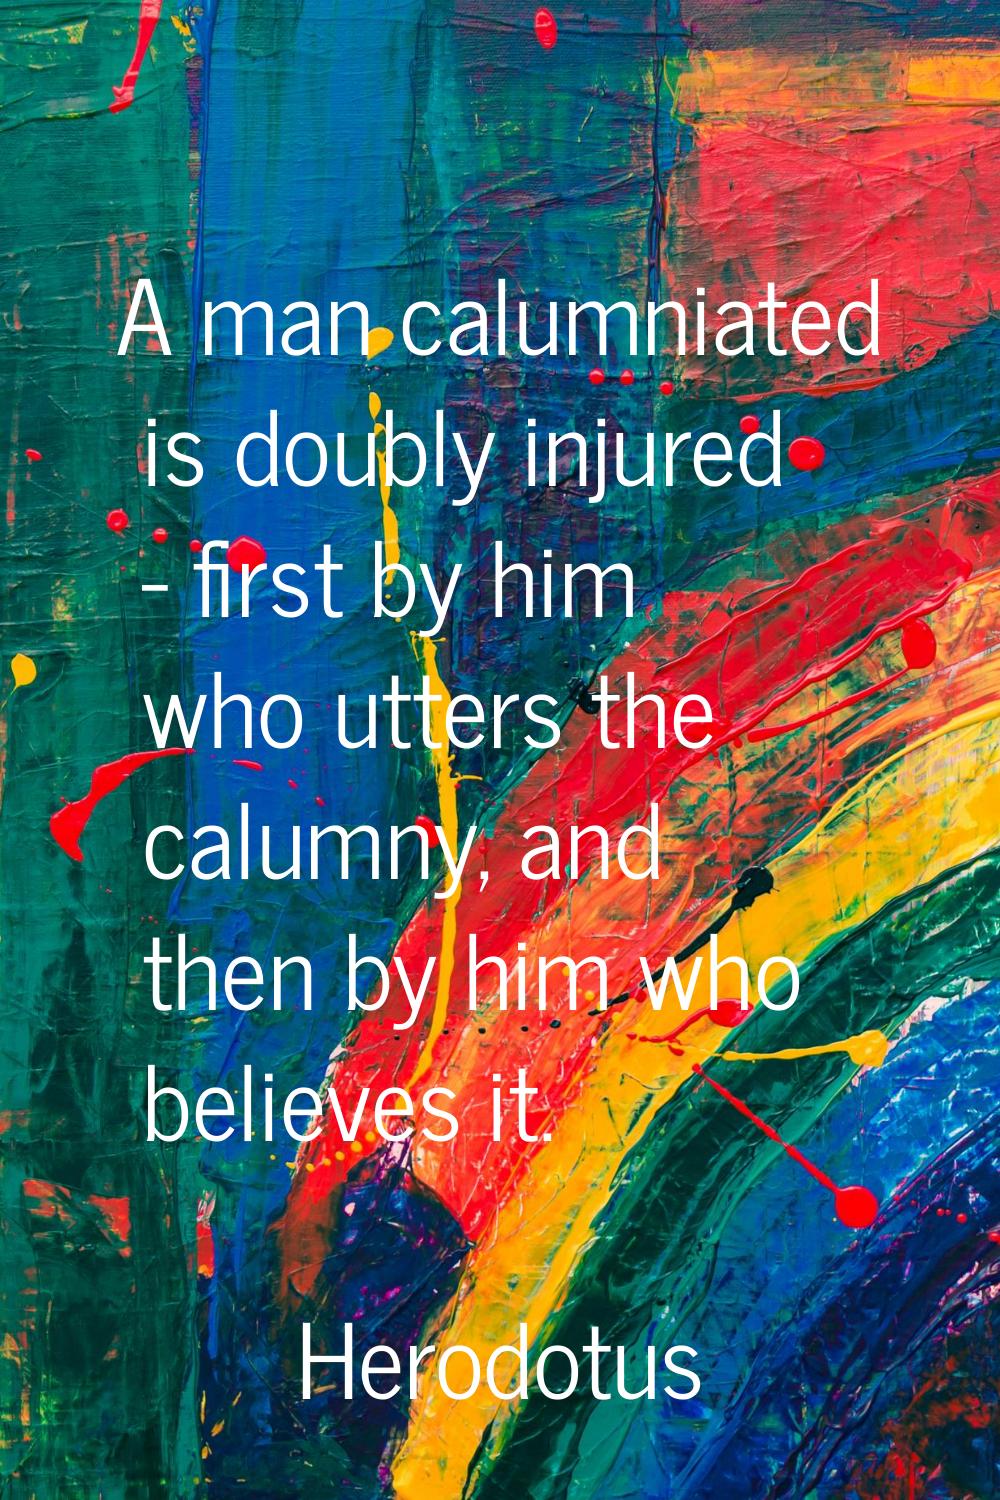 A man calumniated is doubly injured - first by him who utters the calumny, and then by him who beli